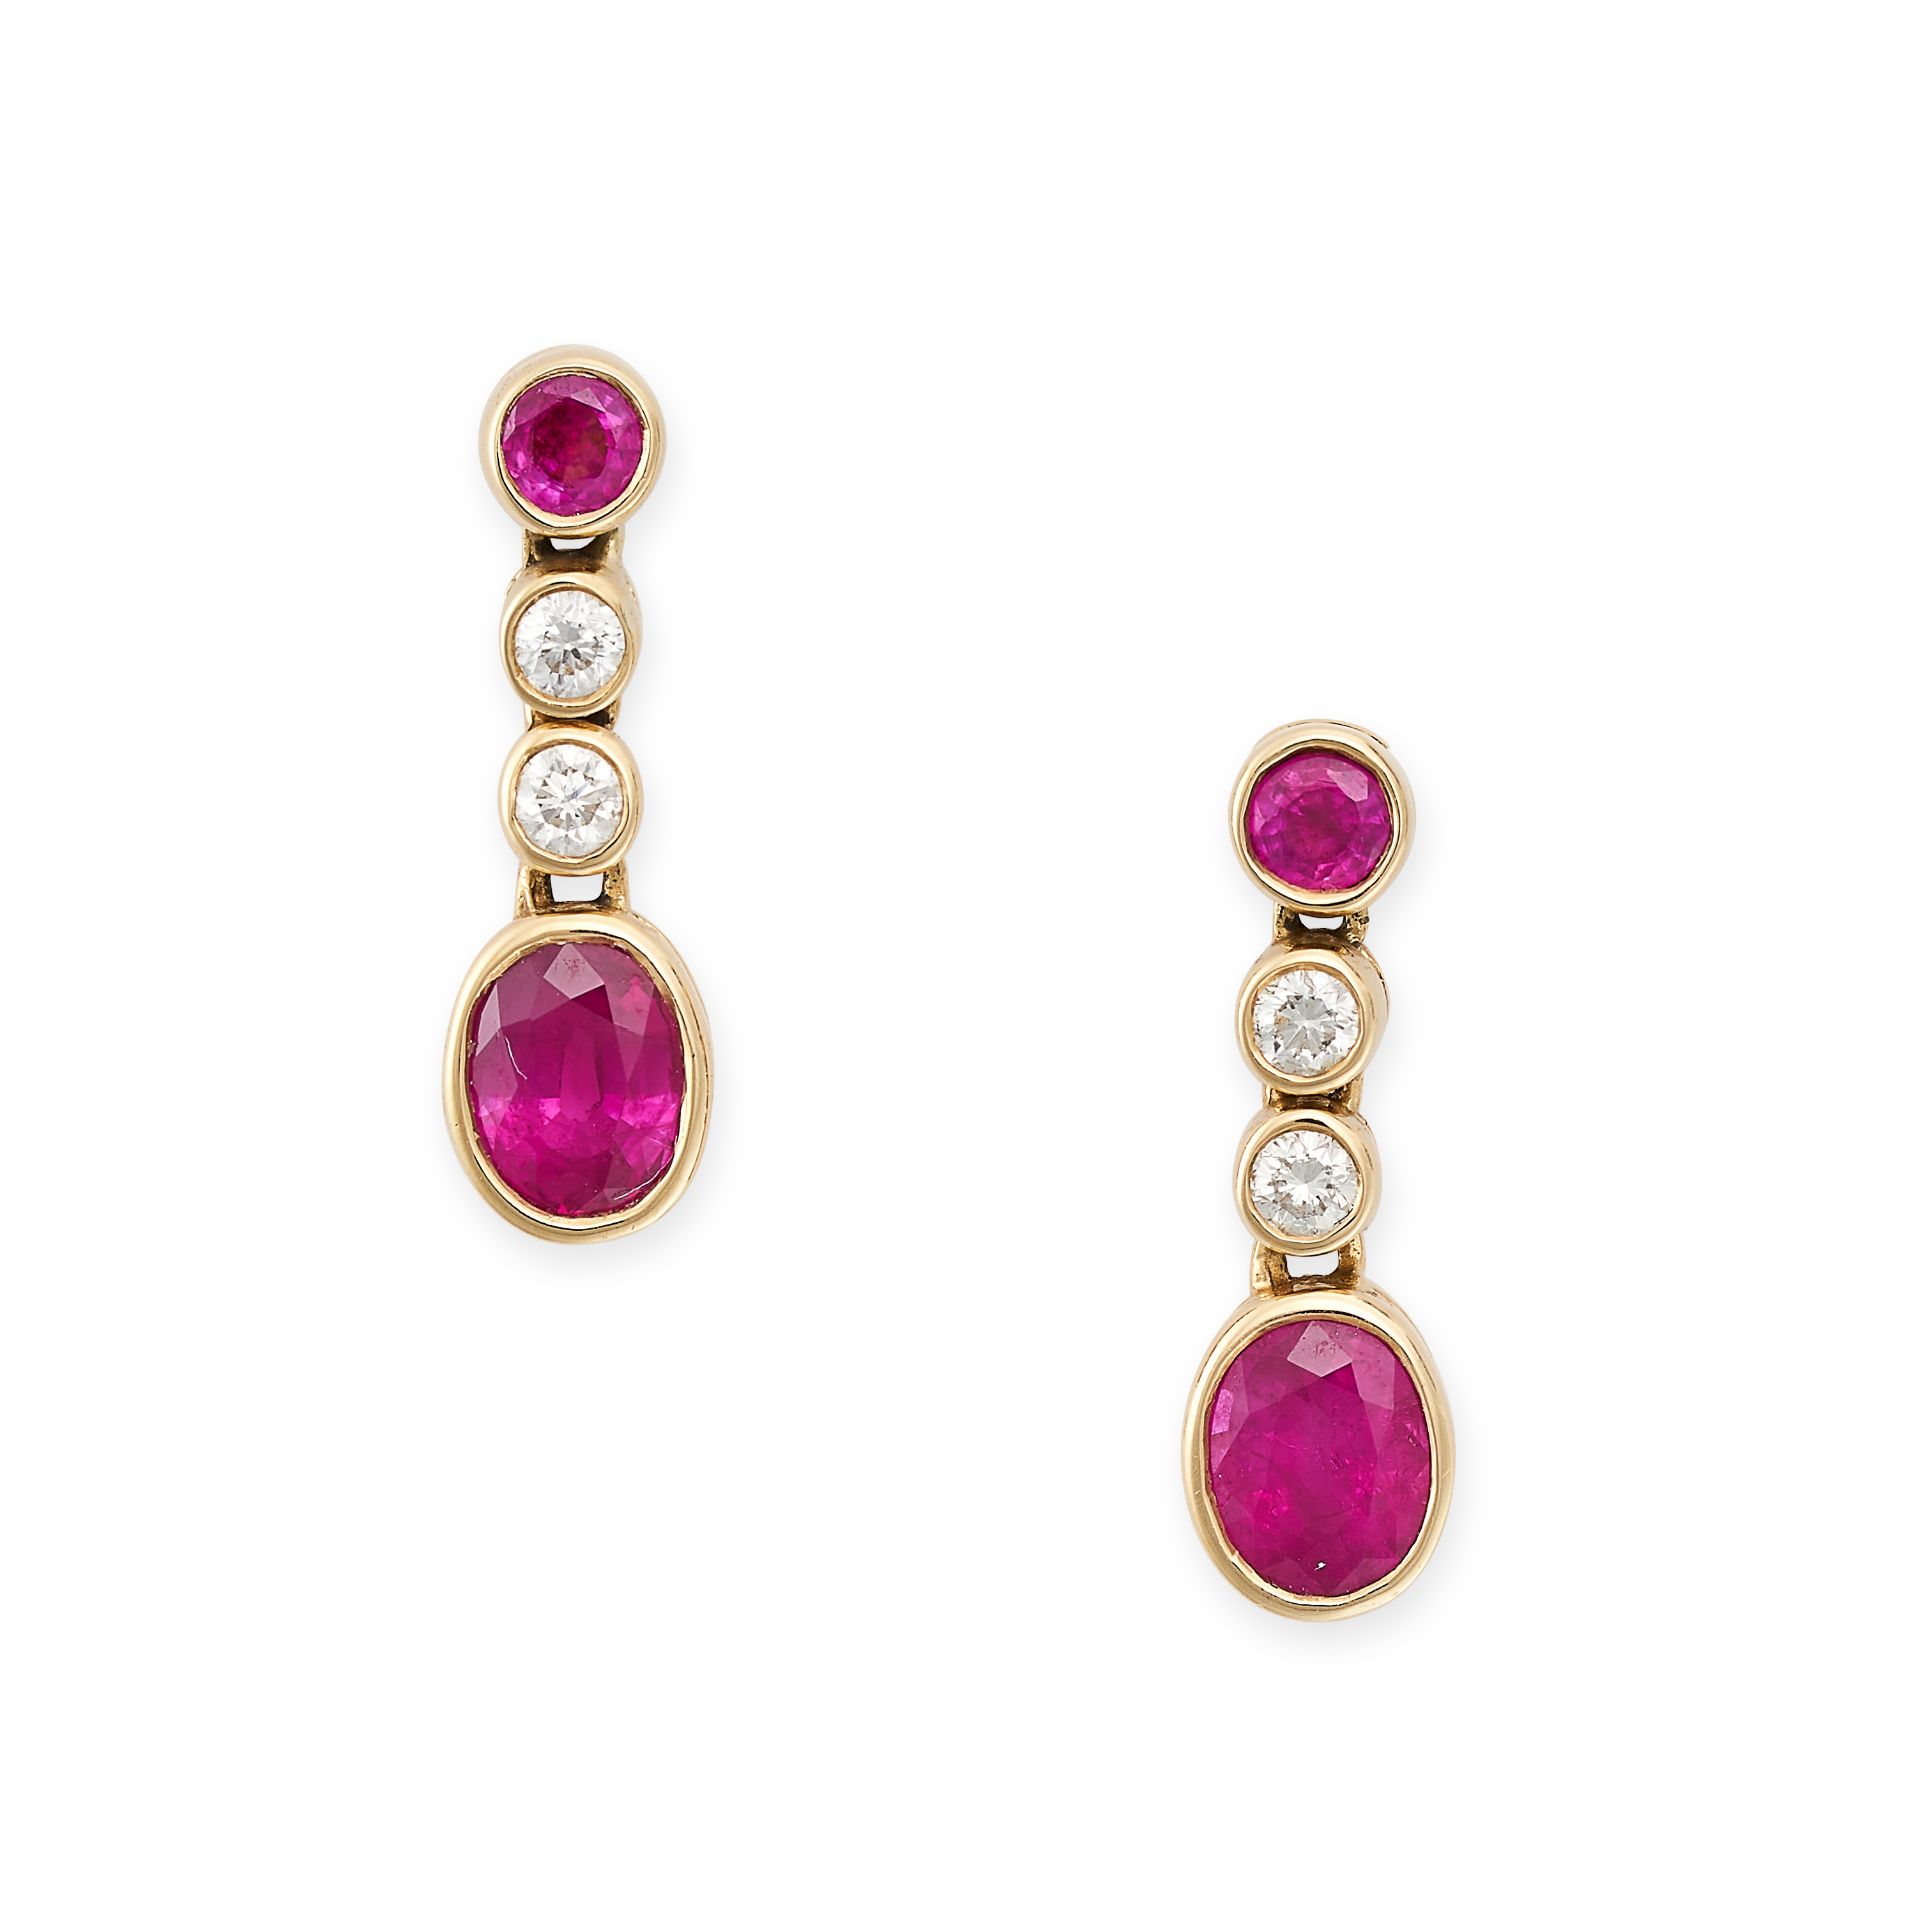 A PAIR OF RUBY AND DIAMOND DROP EARRINGS in 18ct yellow gold, each set with a row of round cut